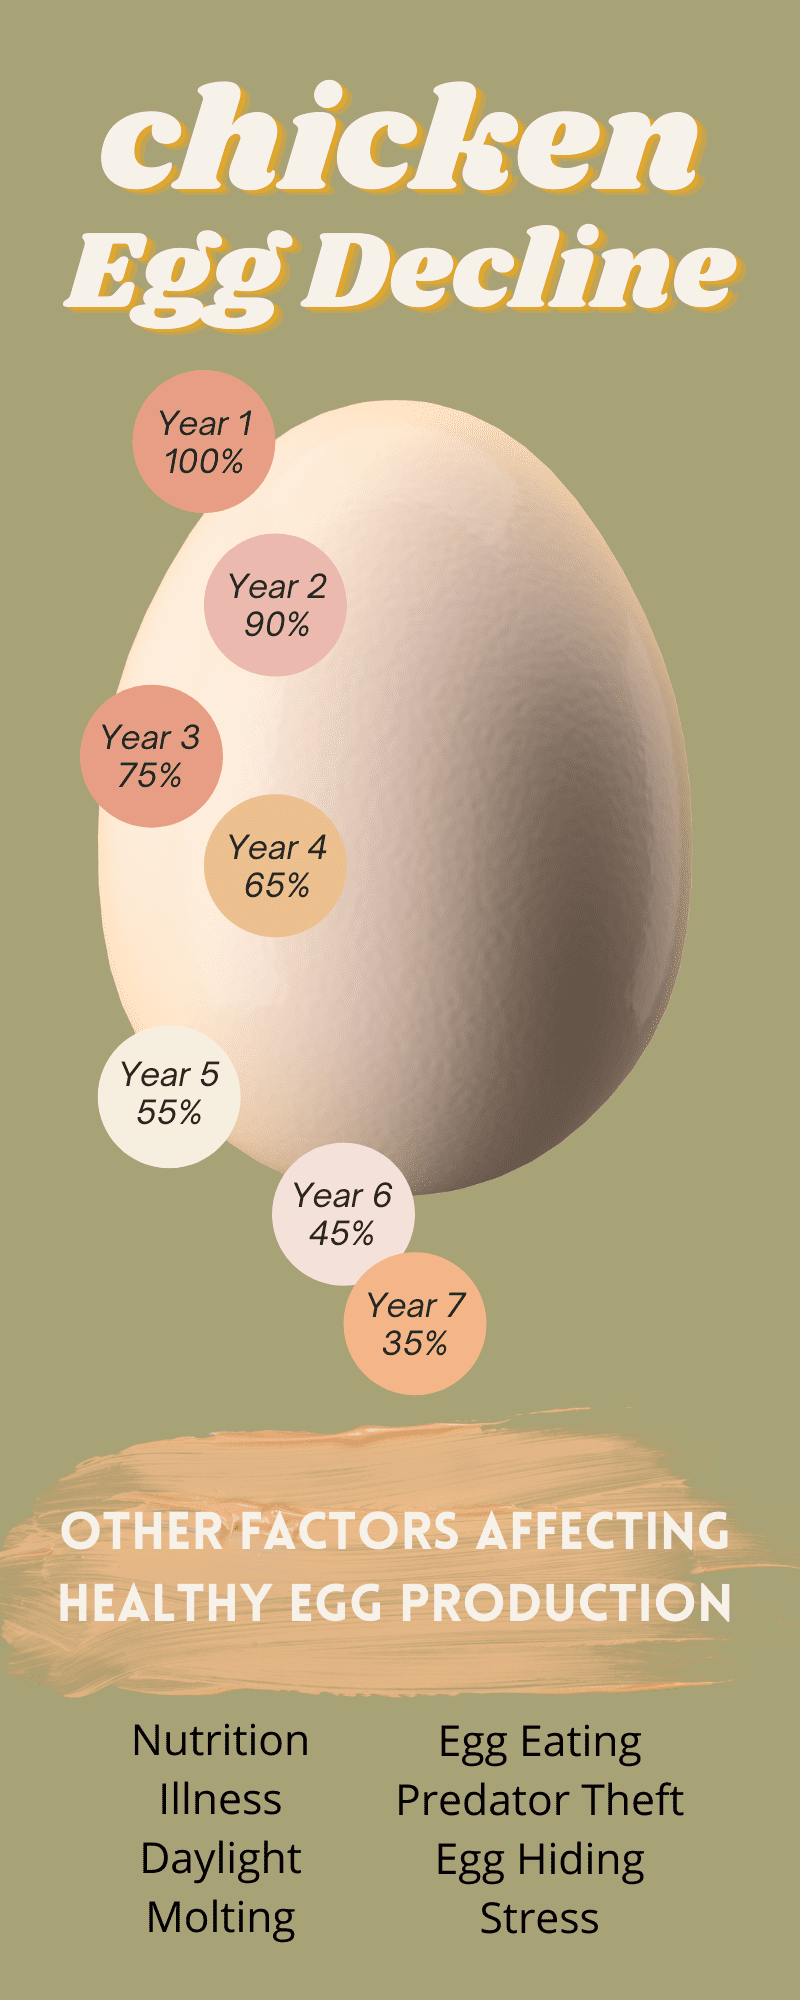 a chart indicating the annual egg decline production of hens